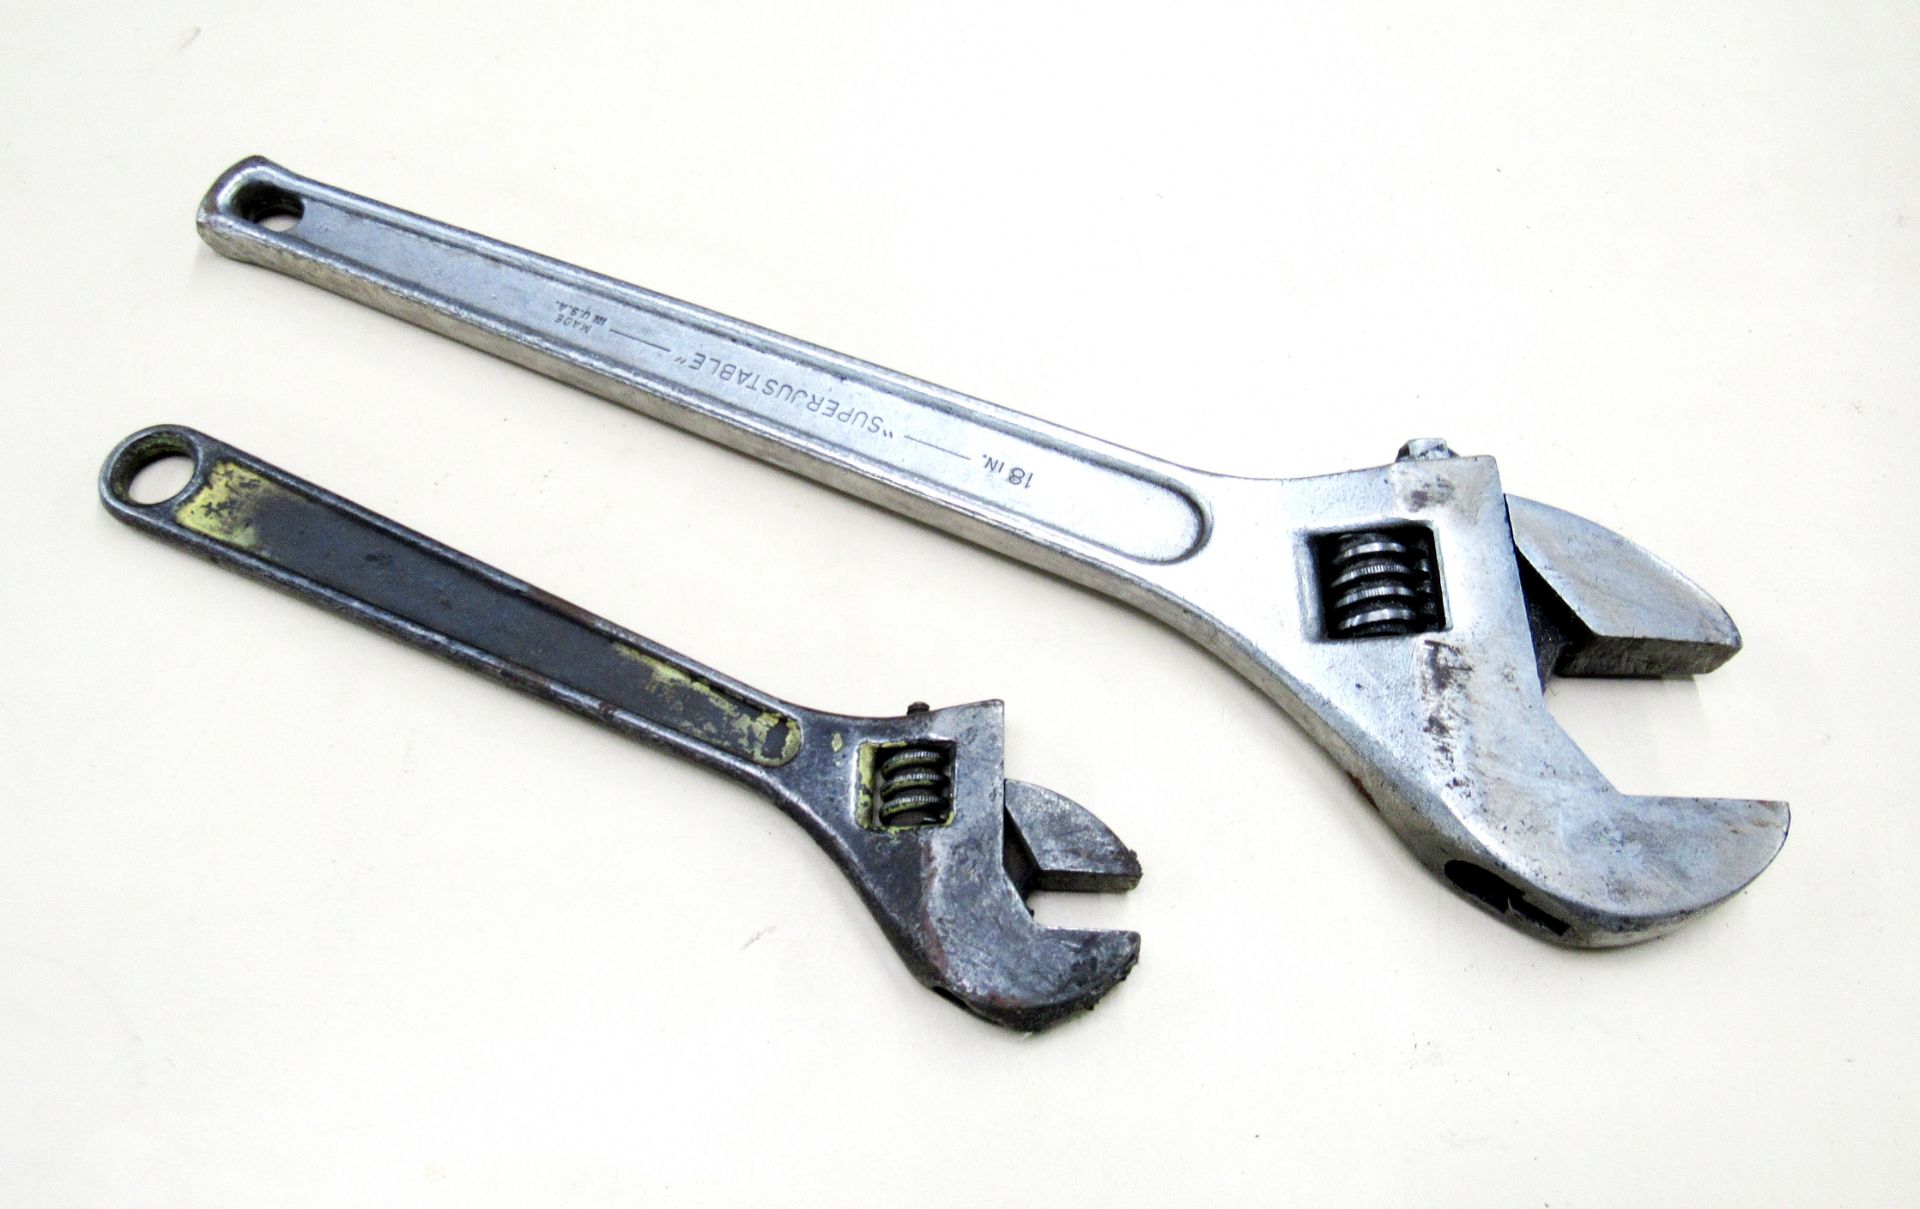 18" JH Williams Adustable Wrench & 12" JH Williams Adjustable Wrench